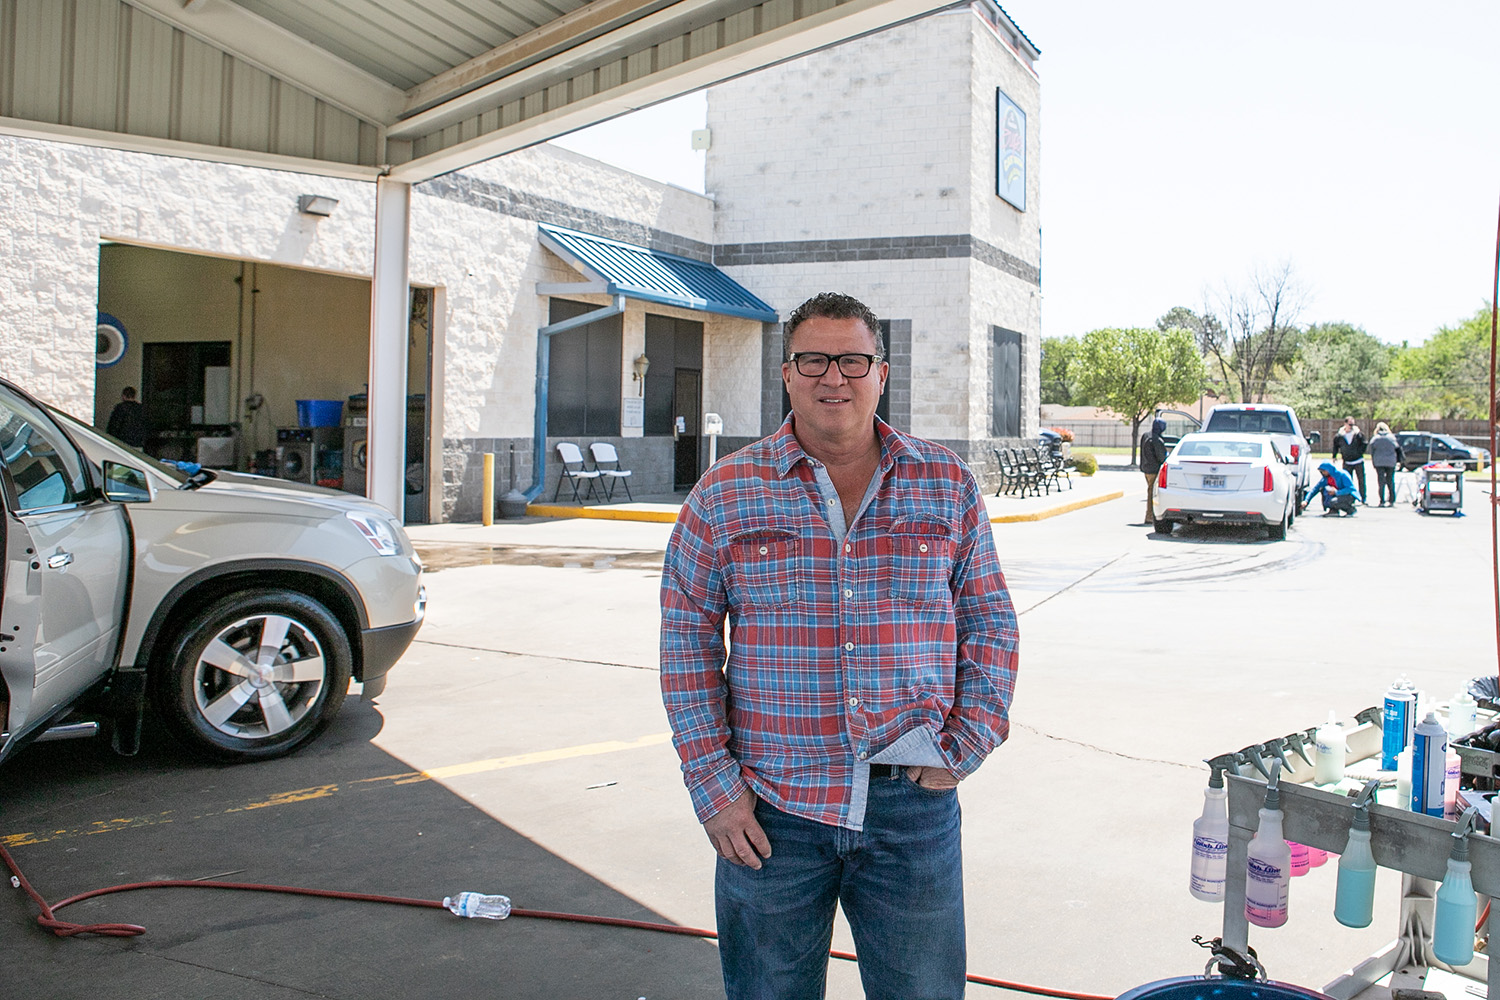 Larry Ayers at one of the carwashes he owns in Wichita Falls.